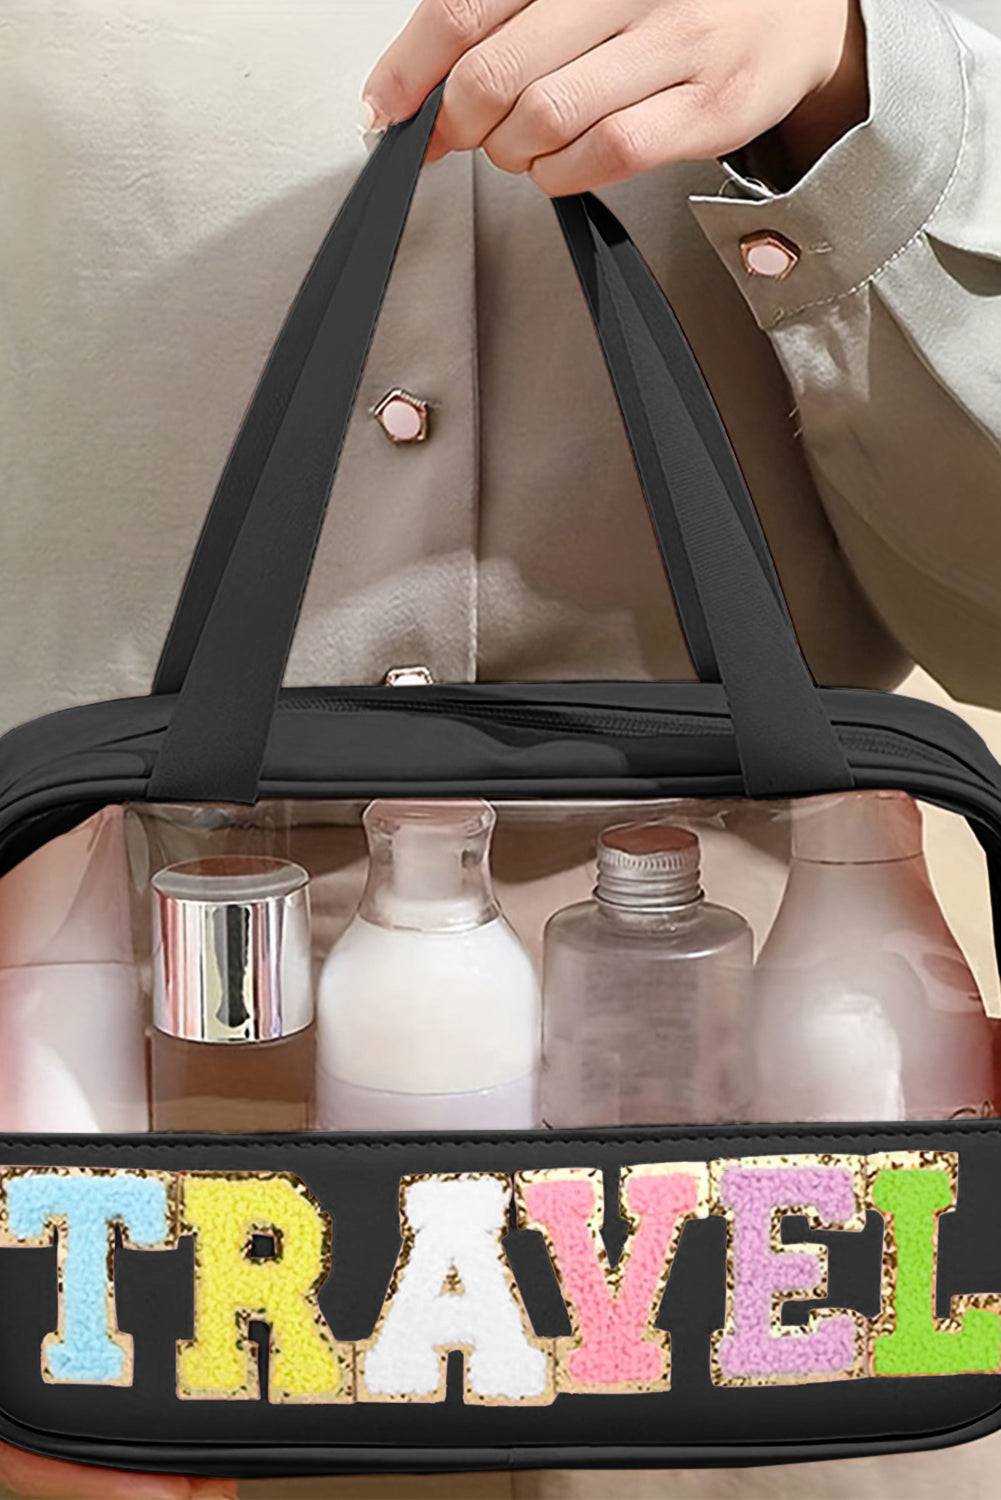 a person holding a travel bag with bottles in it